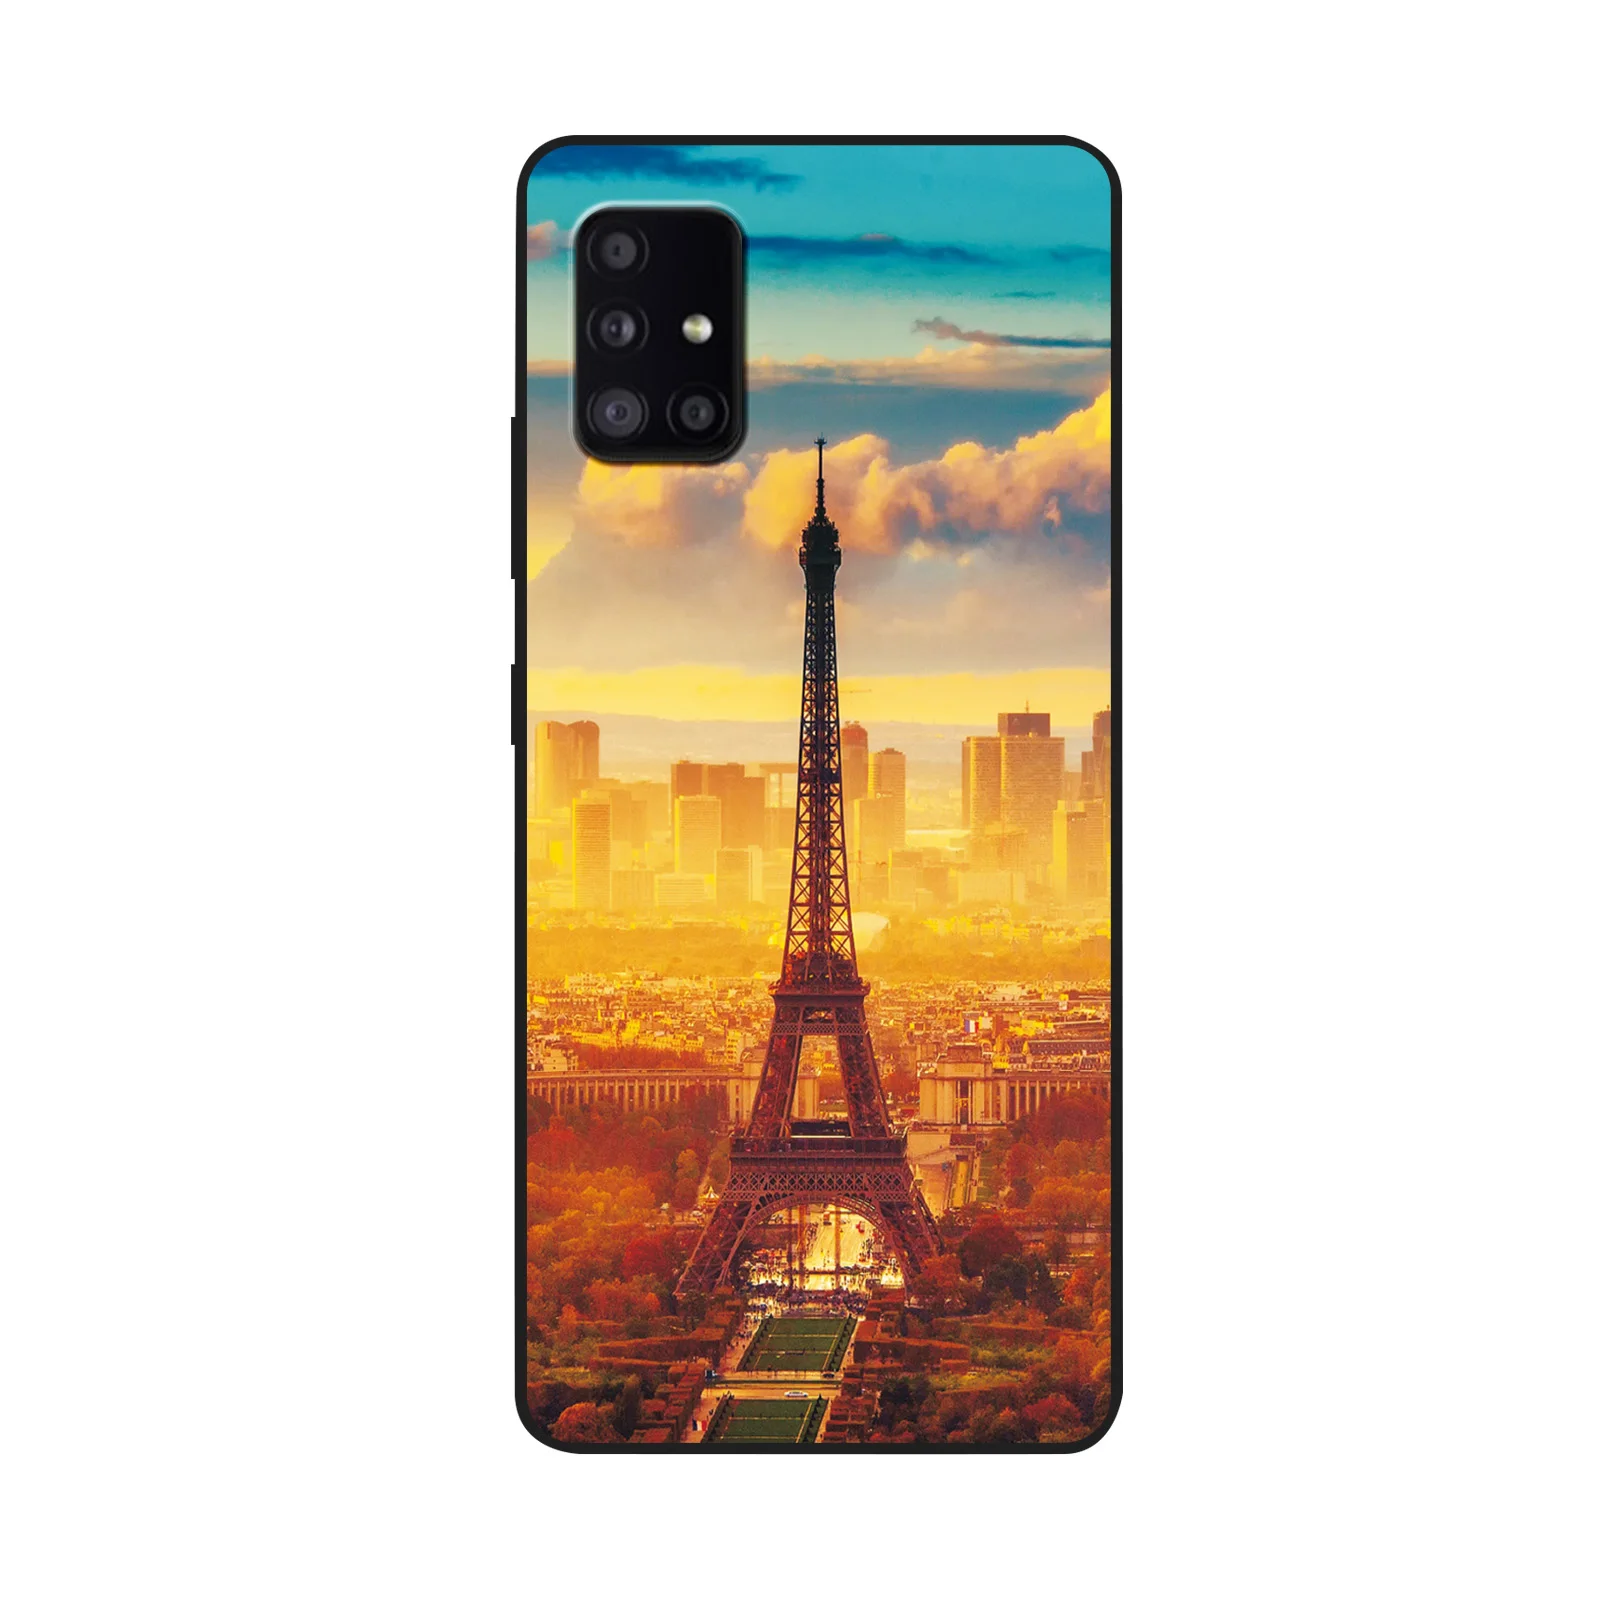 Fashion Bumper For Samsung A51 A71 A30S A50S A30 A50 Case Silicone Scenery Matte Shell For Galaxy A51 A71 4G 5G Case Back Cover images - 6